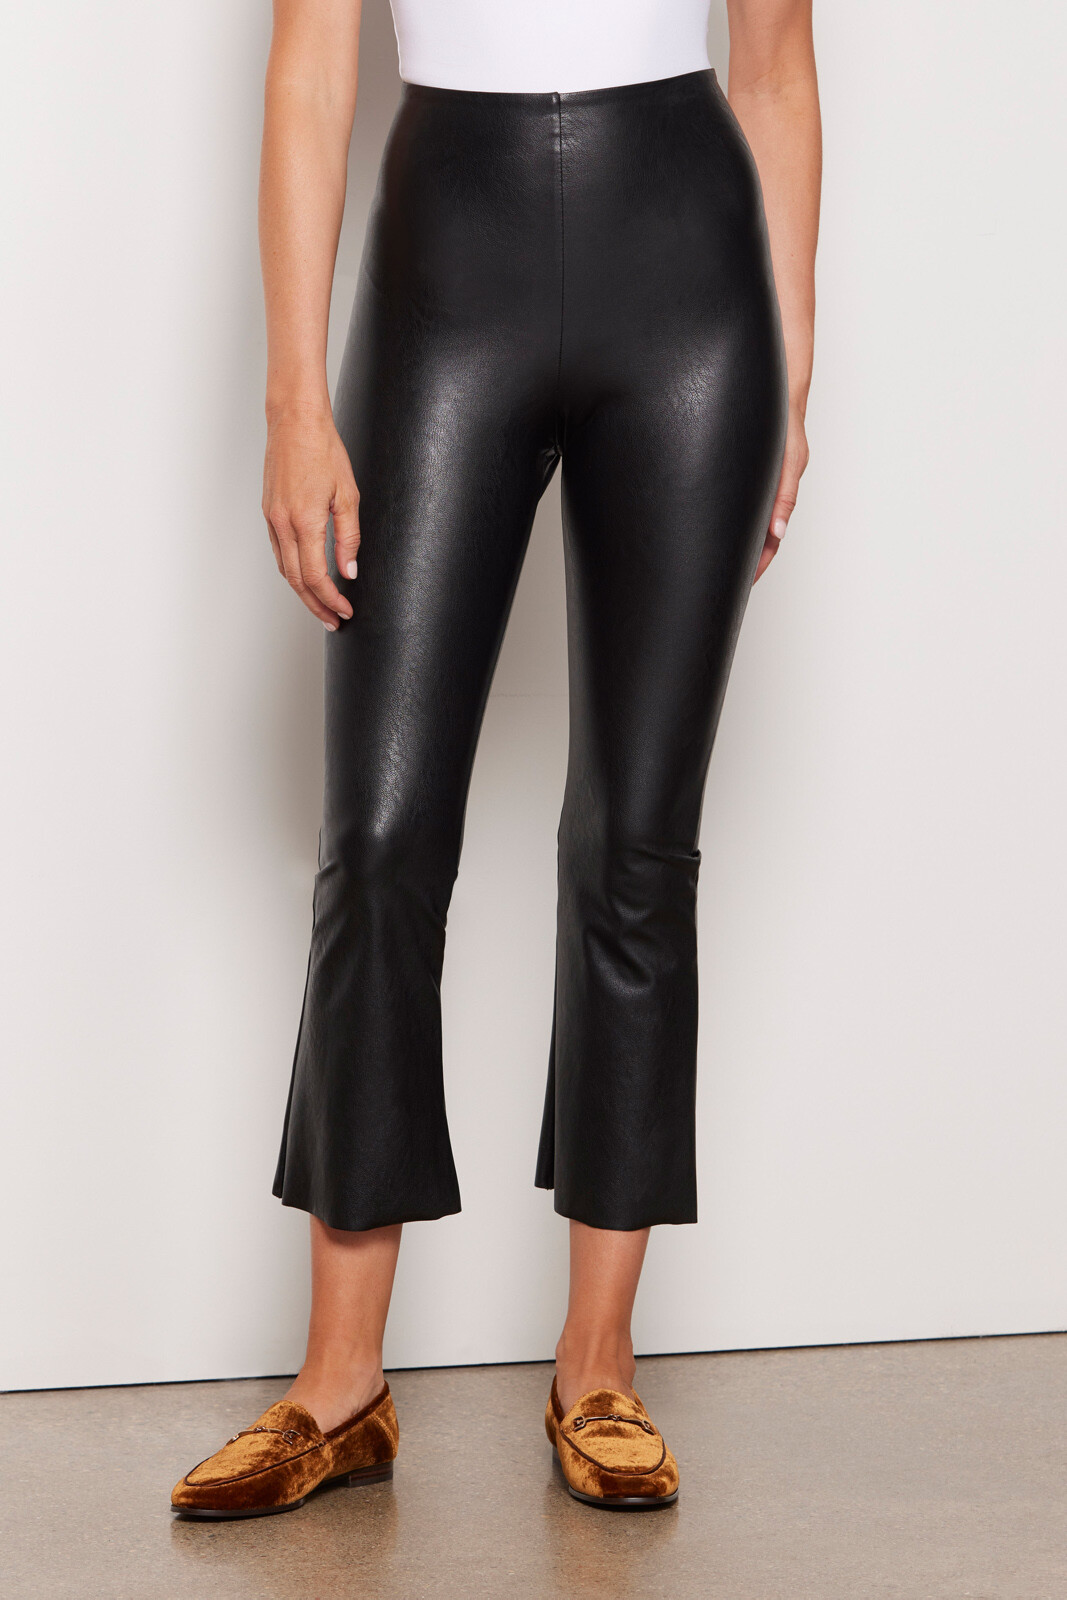 commando faux leather leggings review - how to wear faux leather